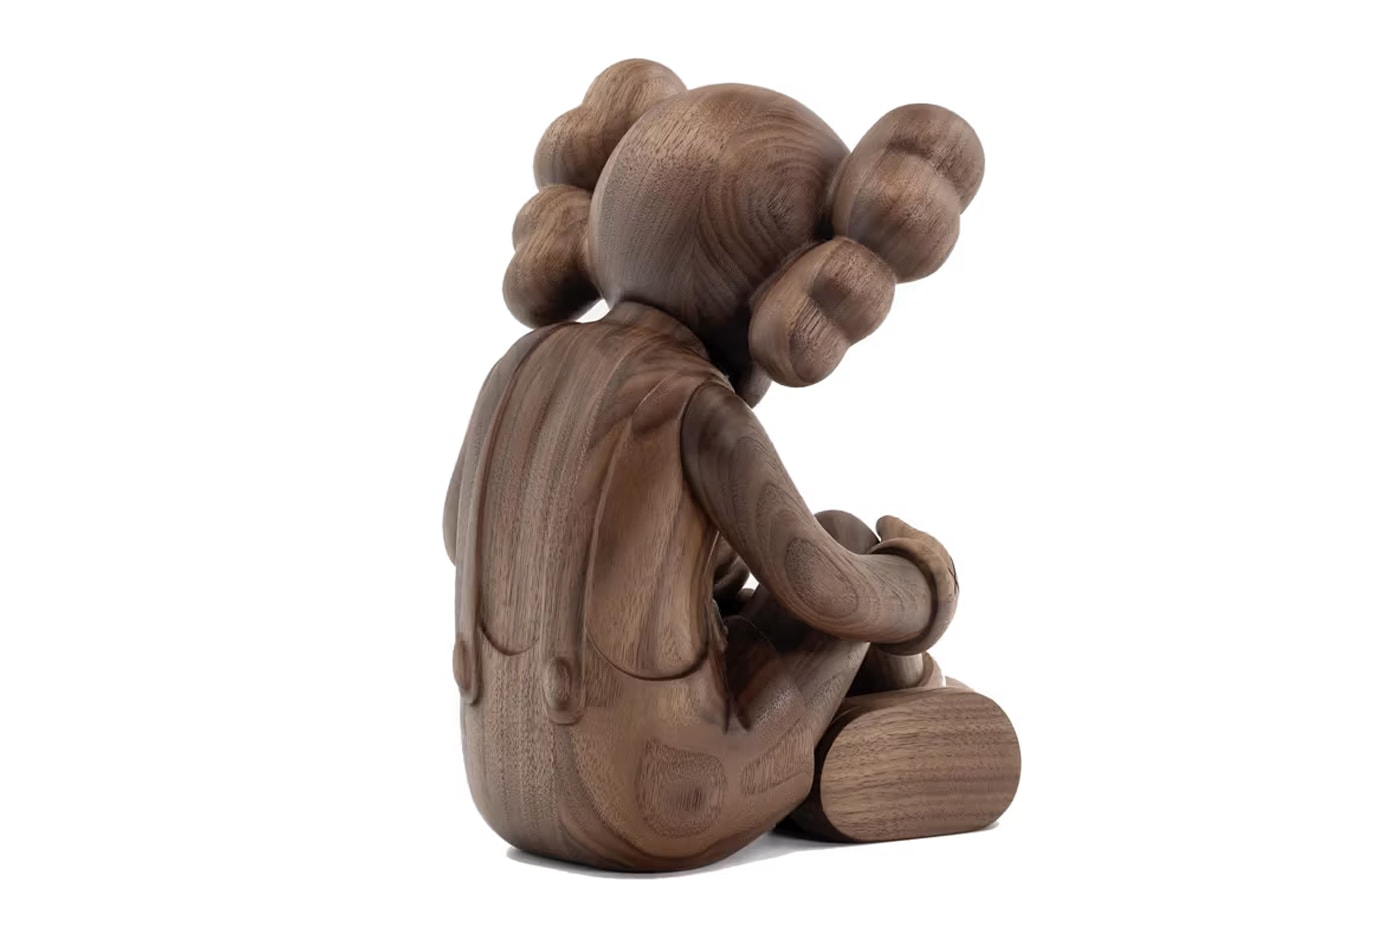 KAWS To Release 'BETTER KNOWING' Figure